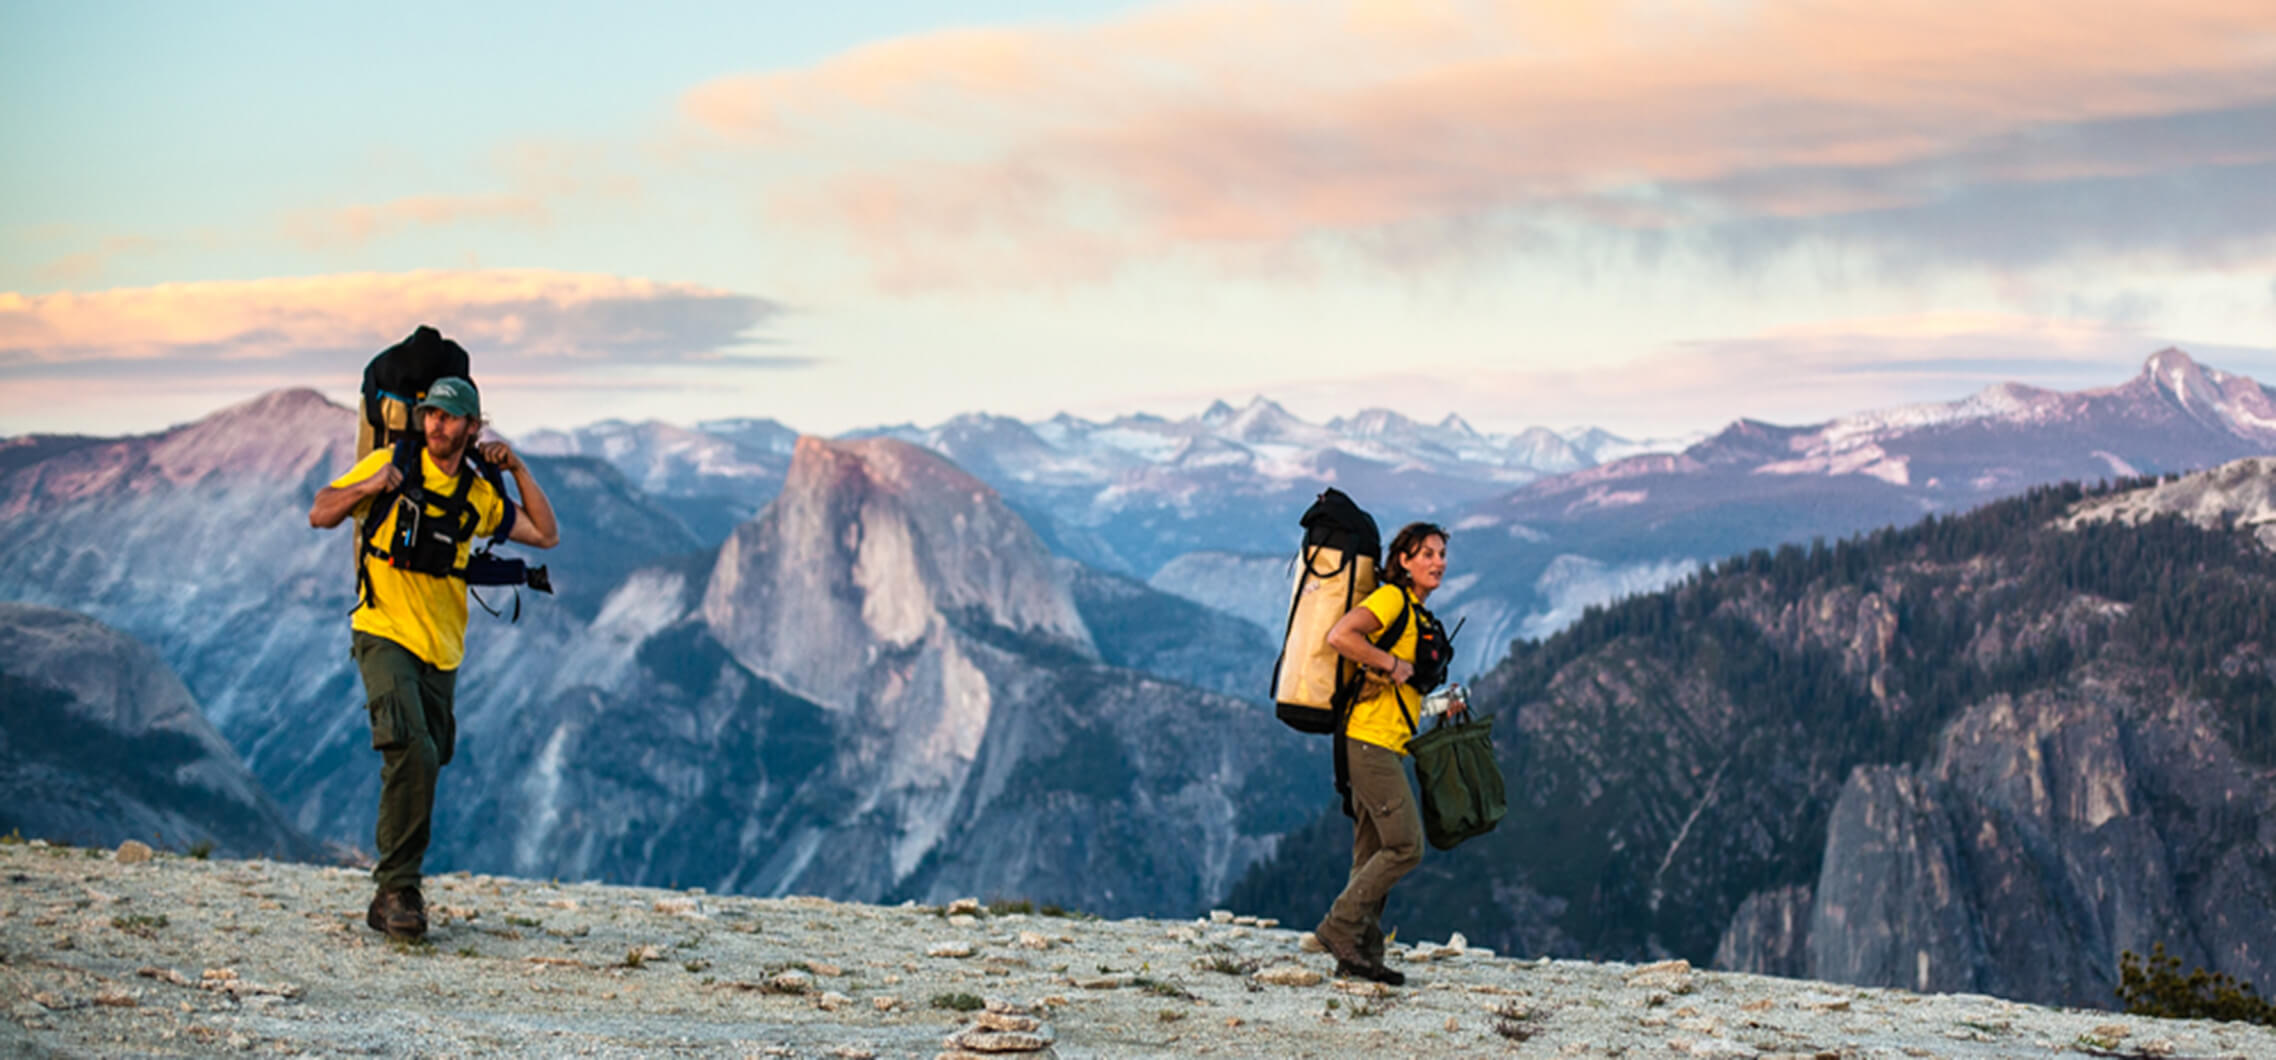 The Other Side of Risk: Yosemite Search and Rescue